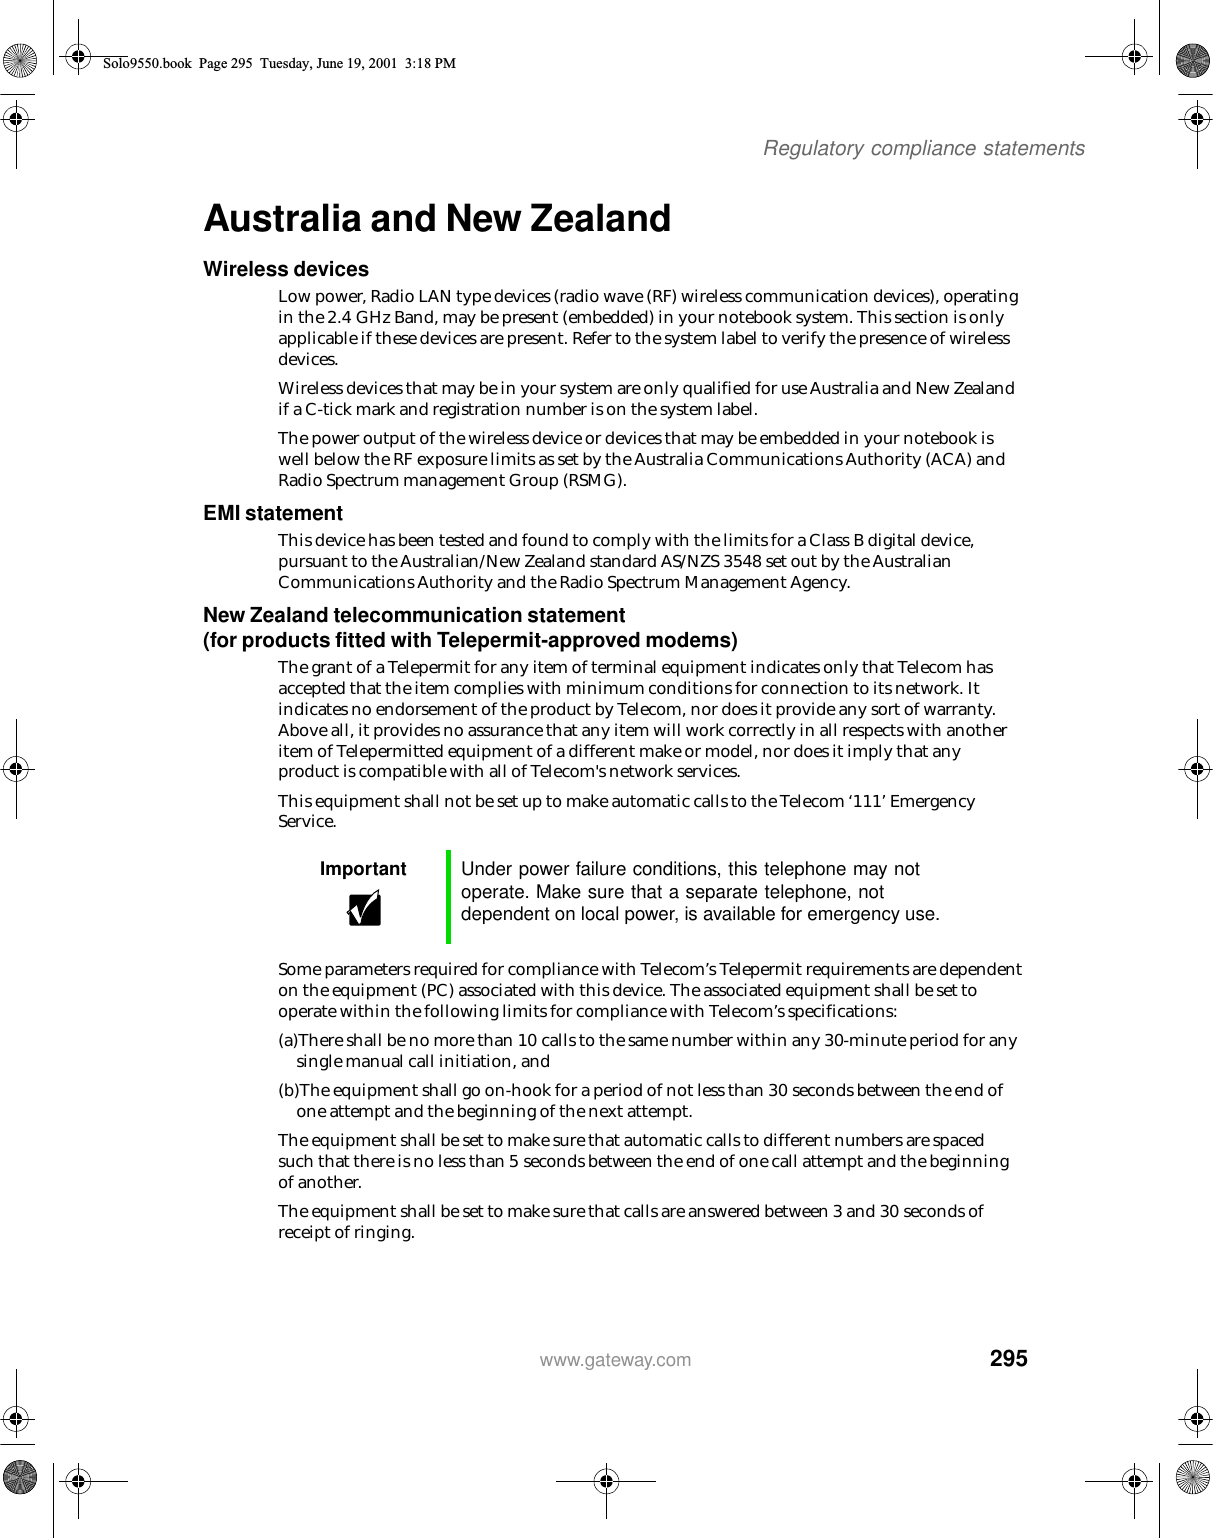 295Regulatory compliance statementswww.gateway.comAustralia and New ZealandWireless devicesLow power, Radio LAN type devices (radio wave (RF) wireless communication devices), operating in the 2.4 GHz Band, may be present (embedded) in your notebook system. This section is only applicable if these devices are present. Refer to the system label to verify the presence of wireless devices.Wireless devices that may be in your system are only qualified for use Australia and New Zealand if a C-tick mark and registration number is on the system label.The power output of the wireless device or devices that may be embedded in your notebook is well below the RF exposure limits as set by the Australia Communications Authority (ACA) and Radio Spectrum management Group (RSMG).EMI statementThis device has been tested and found to comply with the limits for a Class B digital device, pursuant to the Australian/New Zealand standard AS/NZS 3548 set out by the Australian Communications Authority and the Radio Spectrum Management Agency.New Zealand telecommunication statement (for products fitted with Telepermit-approved modems)The grant of a Telepermit for any item of terminal equipment indicates only that Telecom has accepted that the item complies with minimum conditions for connection to its network. It indicates no endorsement of the product by Telecom, nor does it provide any sort of warranty. Above all, it provides no assurance that any item will work correctly in all respects with another item of Telepermitted equipment of a different make or model, nor does it imply that any product is compatible with all of Telecom&apos;s network services.This equipment shall not be set up to make automatic calls to the Telecom ‘111’ Emergency Service.Some parameters required for compliance with Telecom’s Telepermit requirements are dependent on the equipment (PC) associated with this device. The associated equipment shall be set to operate within the following limits for compliance with Telecom’s specifications:(a)There shall be no more than 10 calls to the same number within any 30-minute period for any single manual call initiation, and(b)The equipment shall go on-hook for a period of not less than 30 seconds between the end of one attempt and the beginning of the next attempt.The equipment shall be set to make sure that automatic calls to different numbers are spaced such that there is no less than 5 seconds between the end of one call attempt and the beginning of another.The equipment shall be set to make sure that calls are answered between 3 and 30 seconds of receipt of ringing.Important Under power failure conditions, this telephone may not operate. Make sure that a separate telephone, not dependent on local power, is available for emergency use.Solo9550.book Page 295 Tuesday, June 19, 2001 3:18 PM